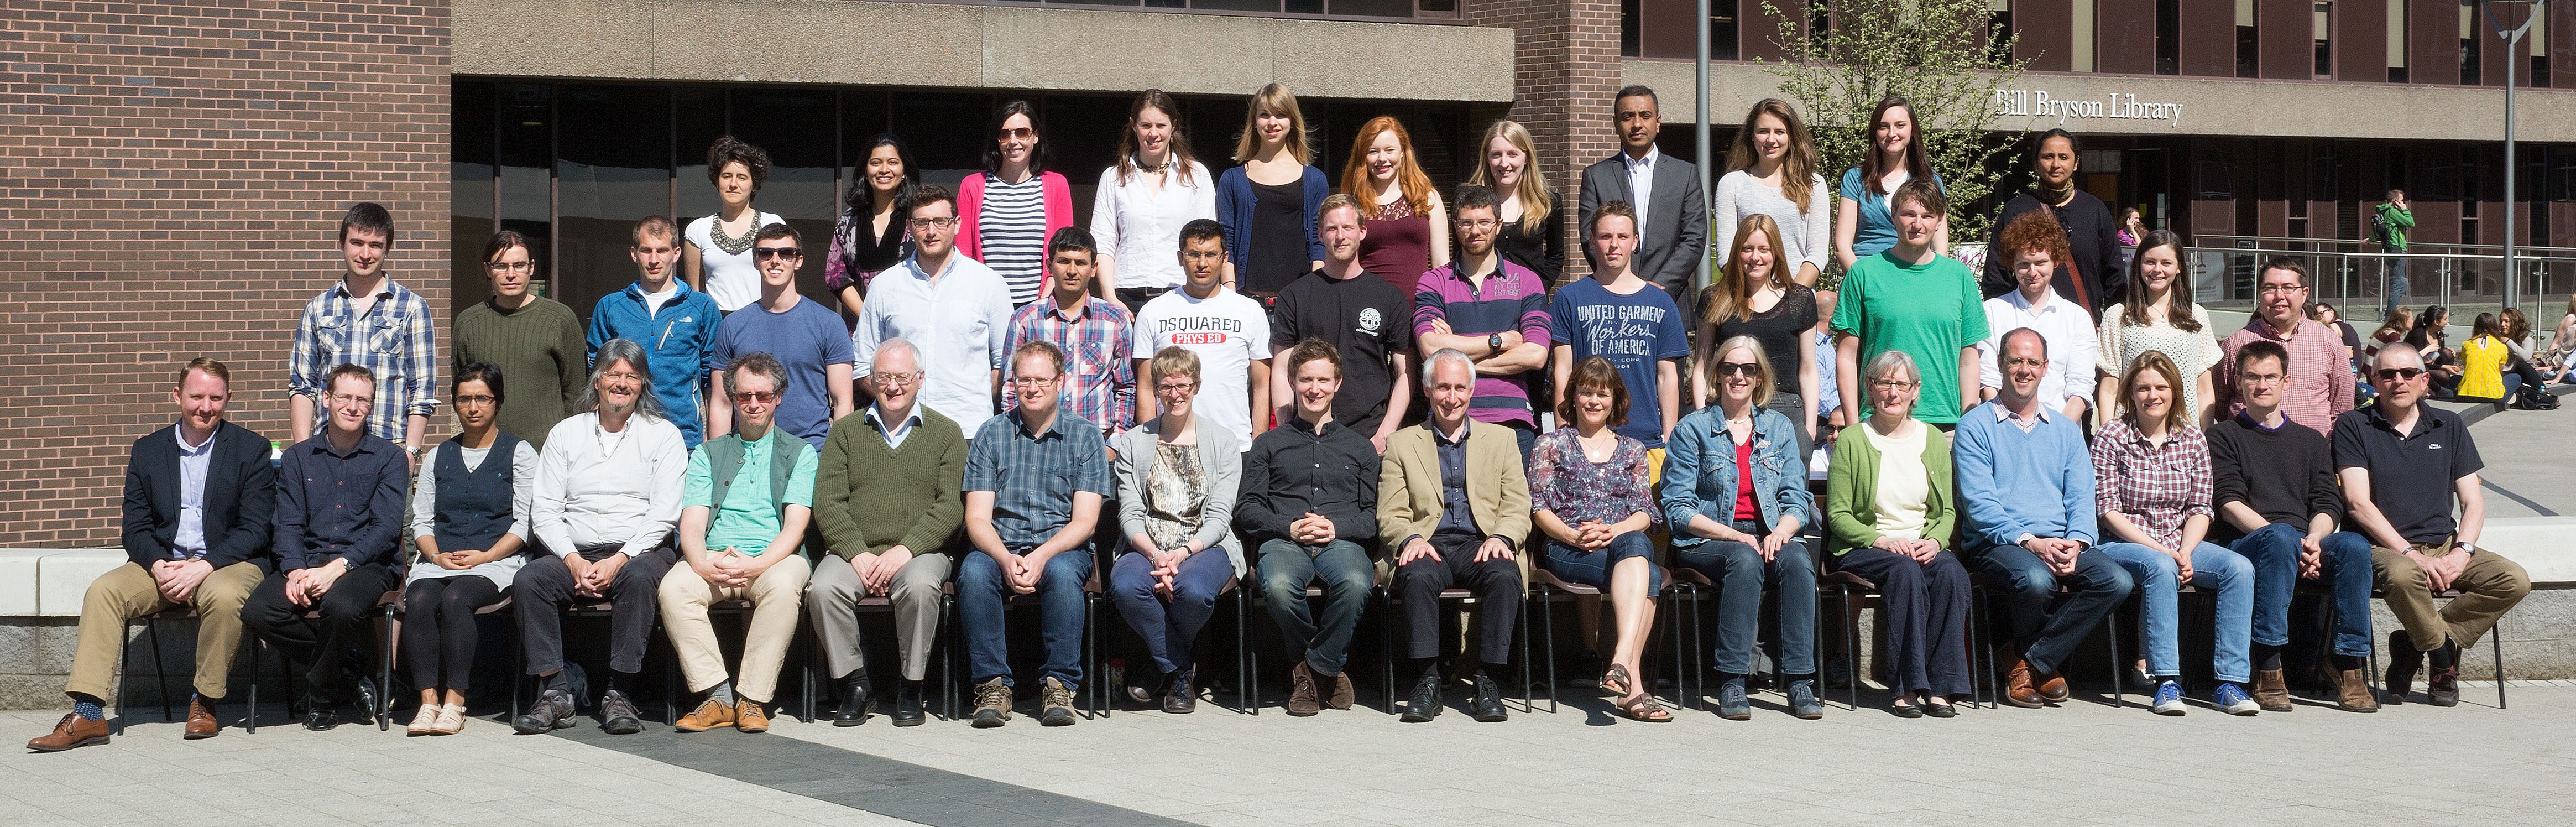 Geography Department Postgraduate Group Photo from 2015